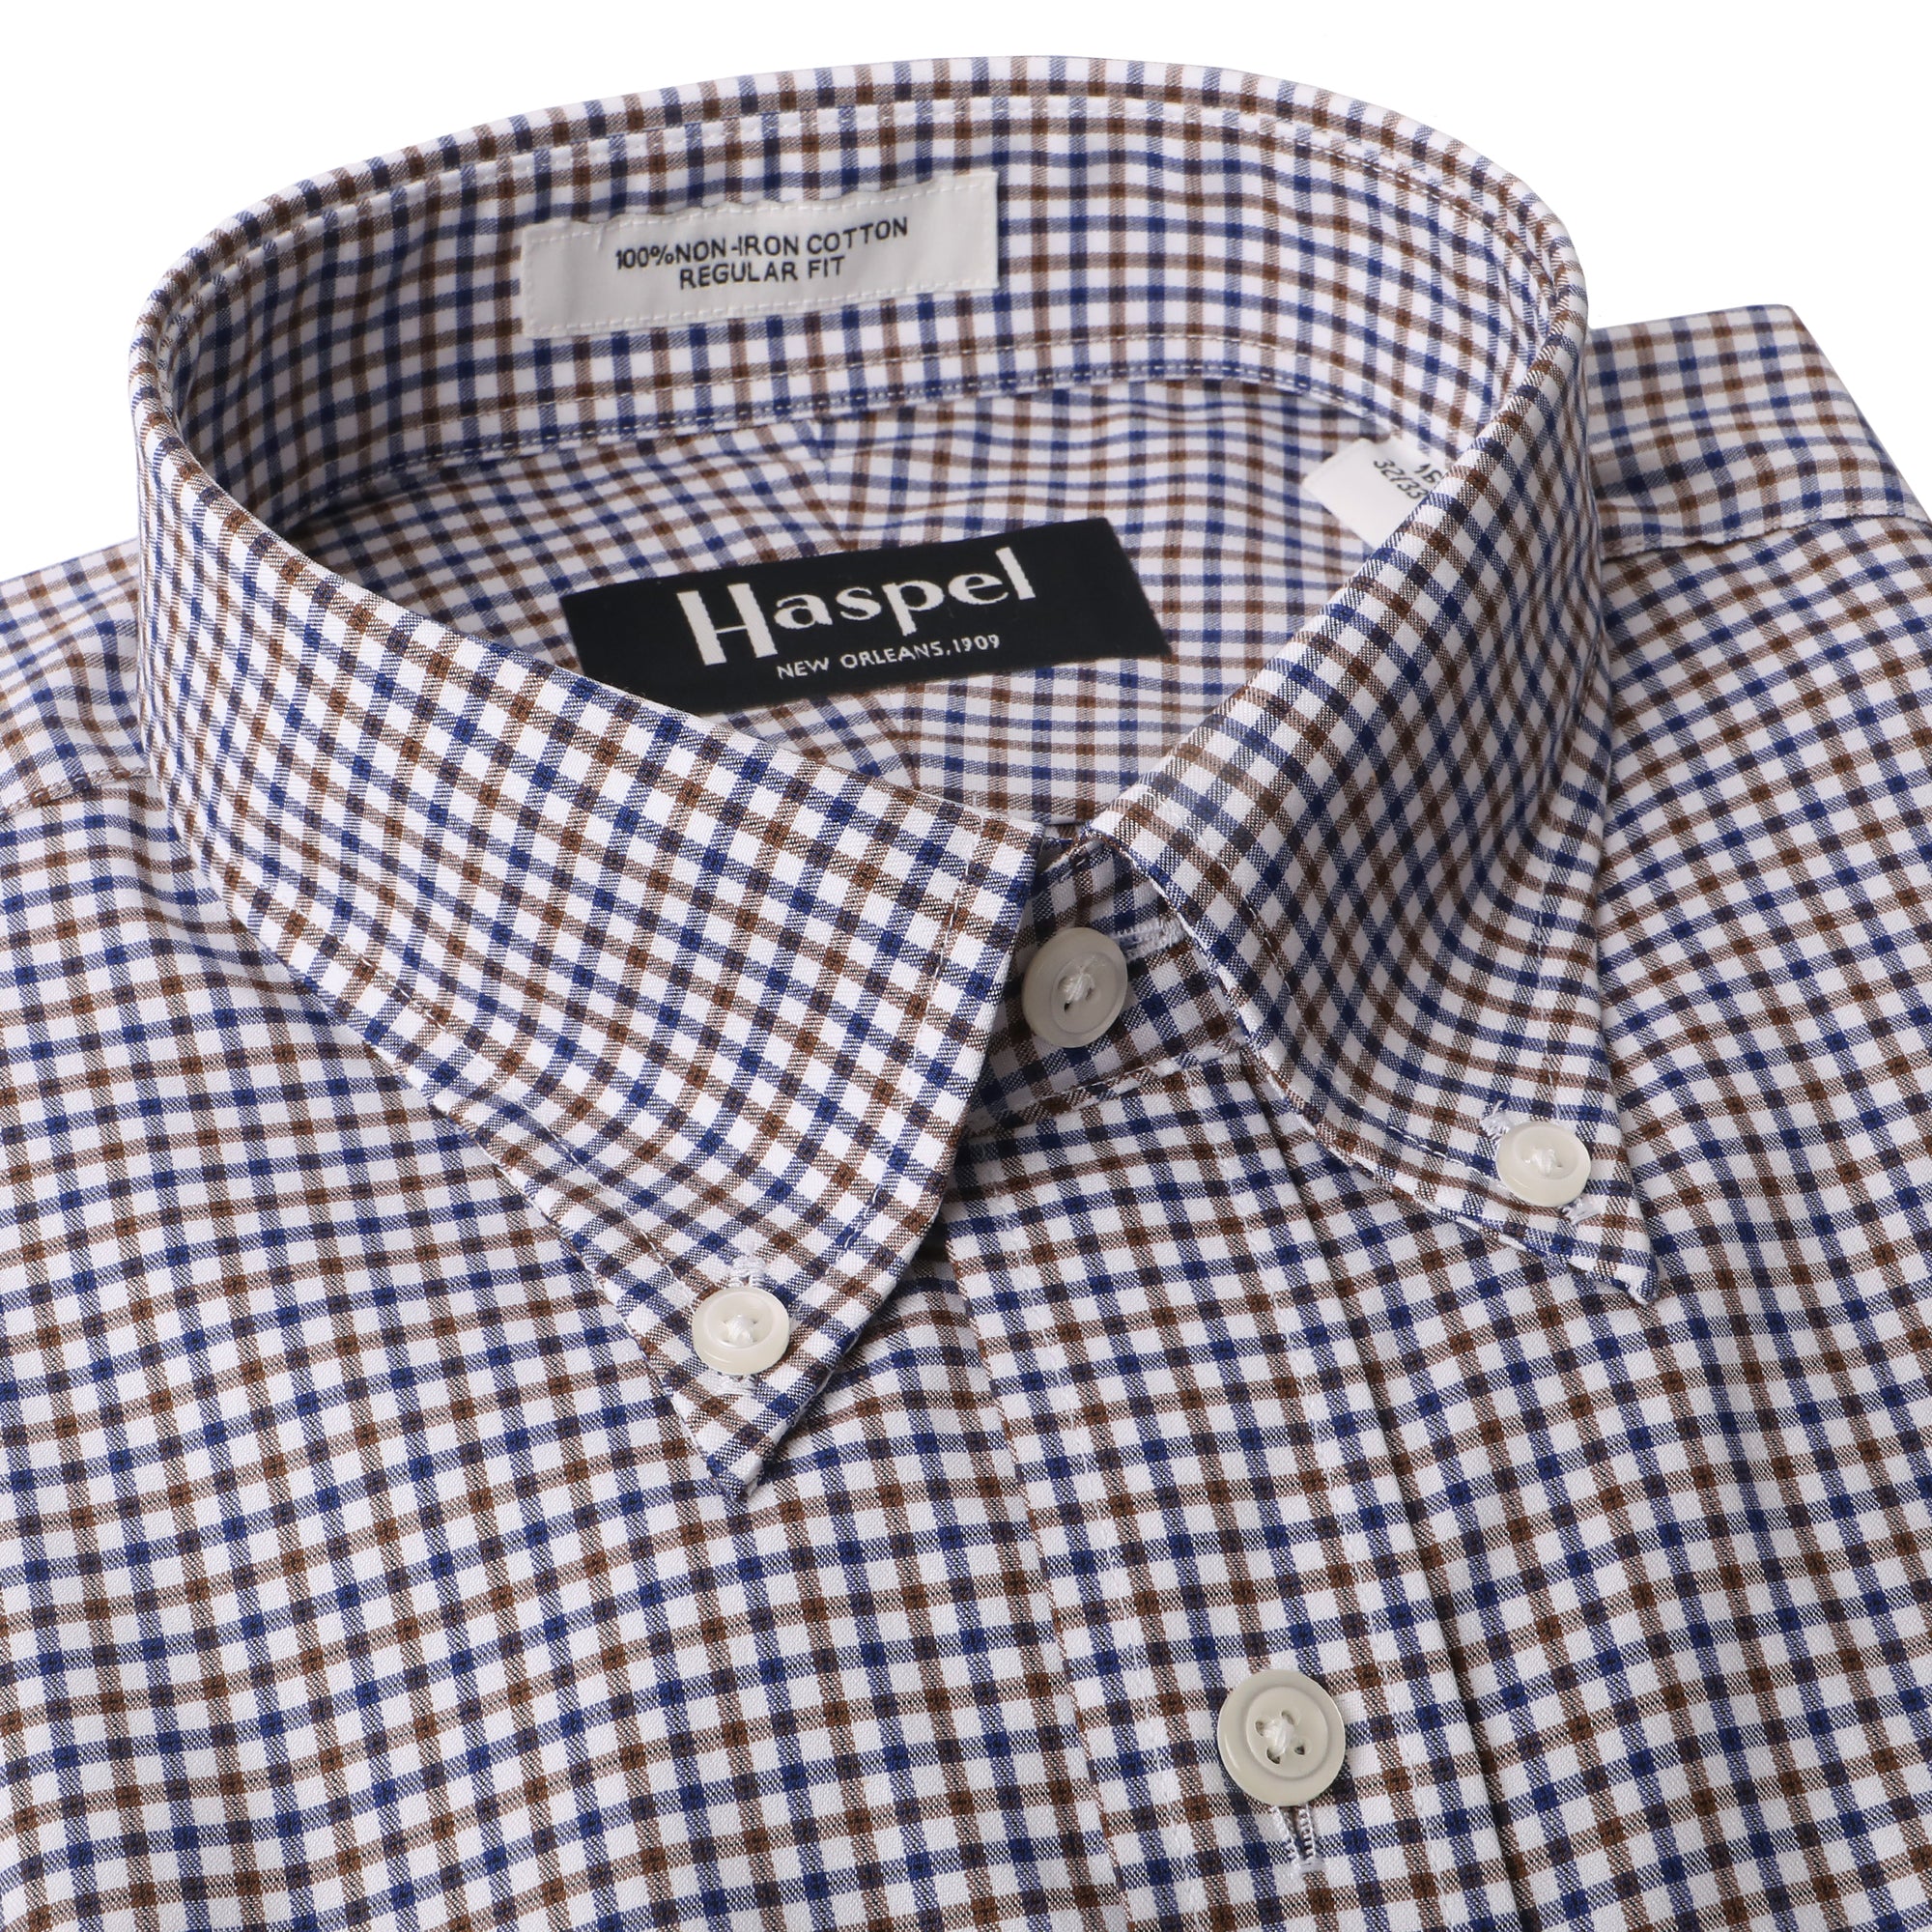 Classic men's dress shirts here that were carefully chosen to pair up with our unique, lightweight men's suits.  100% Imported Combed Cotton  •  80's 2-Ply/Non-Iron Pinpoint Fabric  •  Button Down Collar  •  Long Sleeve, Button Cuff